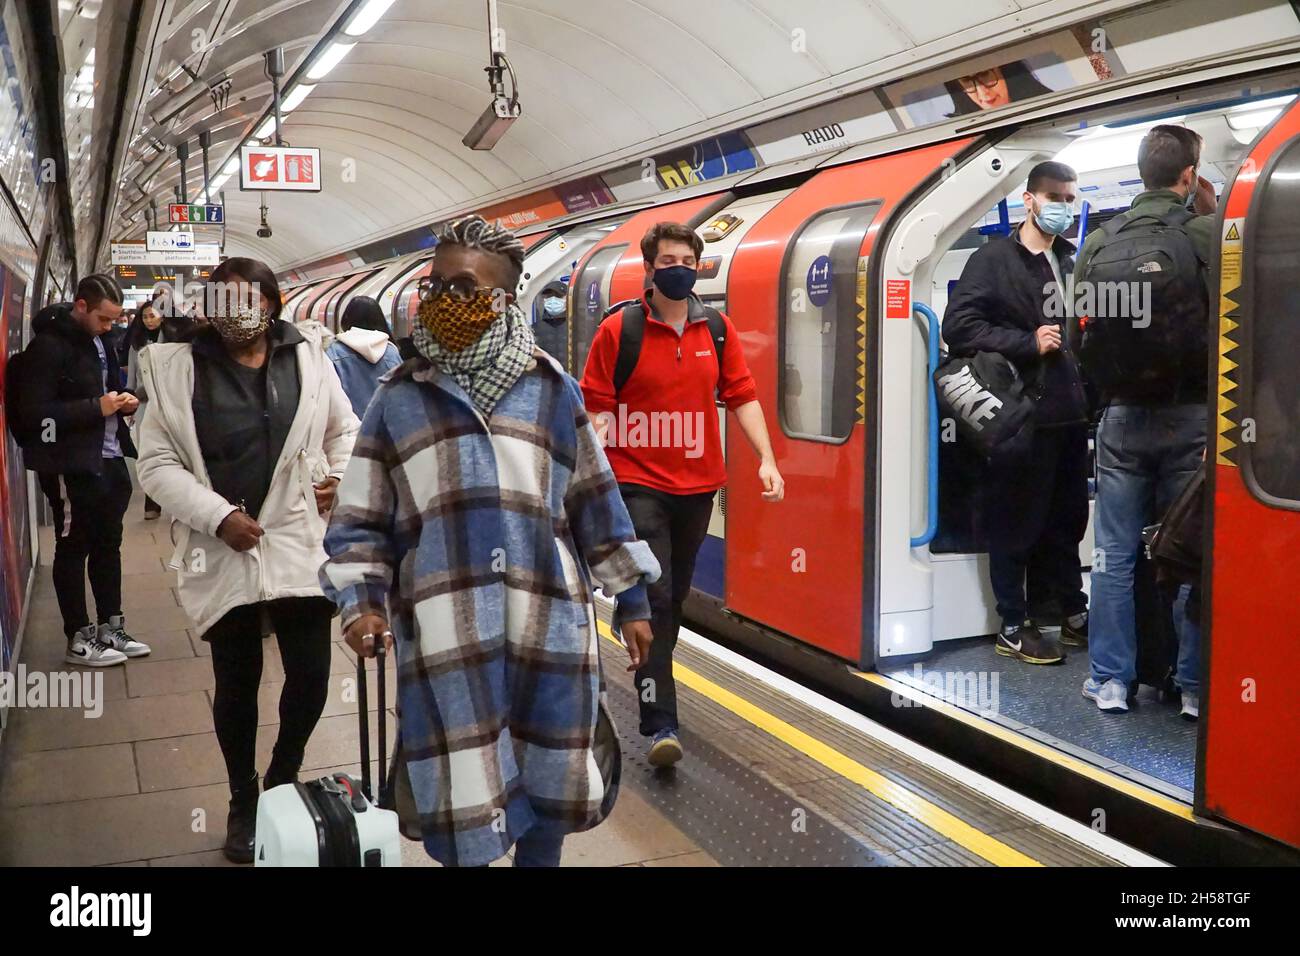 London, UK, 7 November 2021: Many but not all passengers on the London Underground wear face masks to reduce the spread of coronavirus amid high levels of new Covid-19 cases in the country. Transport for London regulations make it compulsory to wear a face covering unless medically exempt but the rule is widely ignored. Anna Watson/Alamy Live News Stock Photo